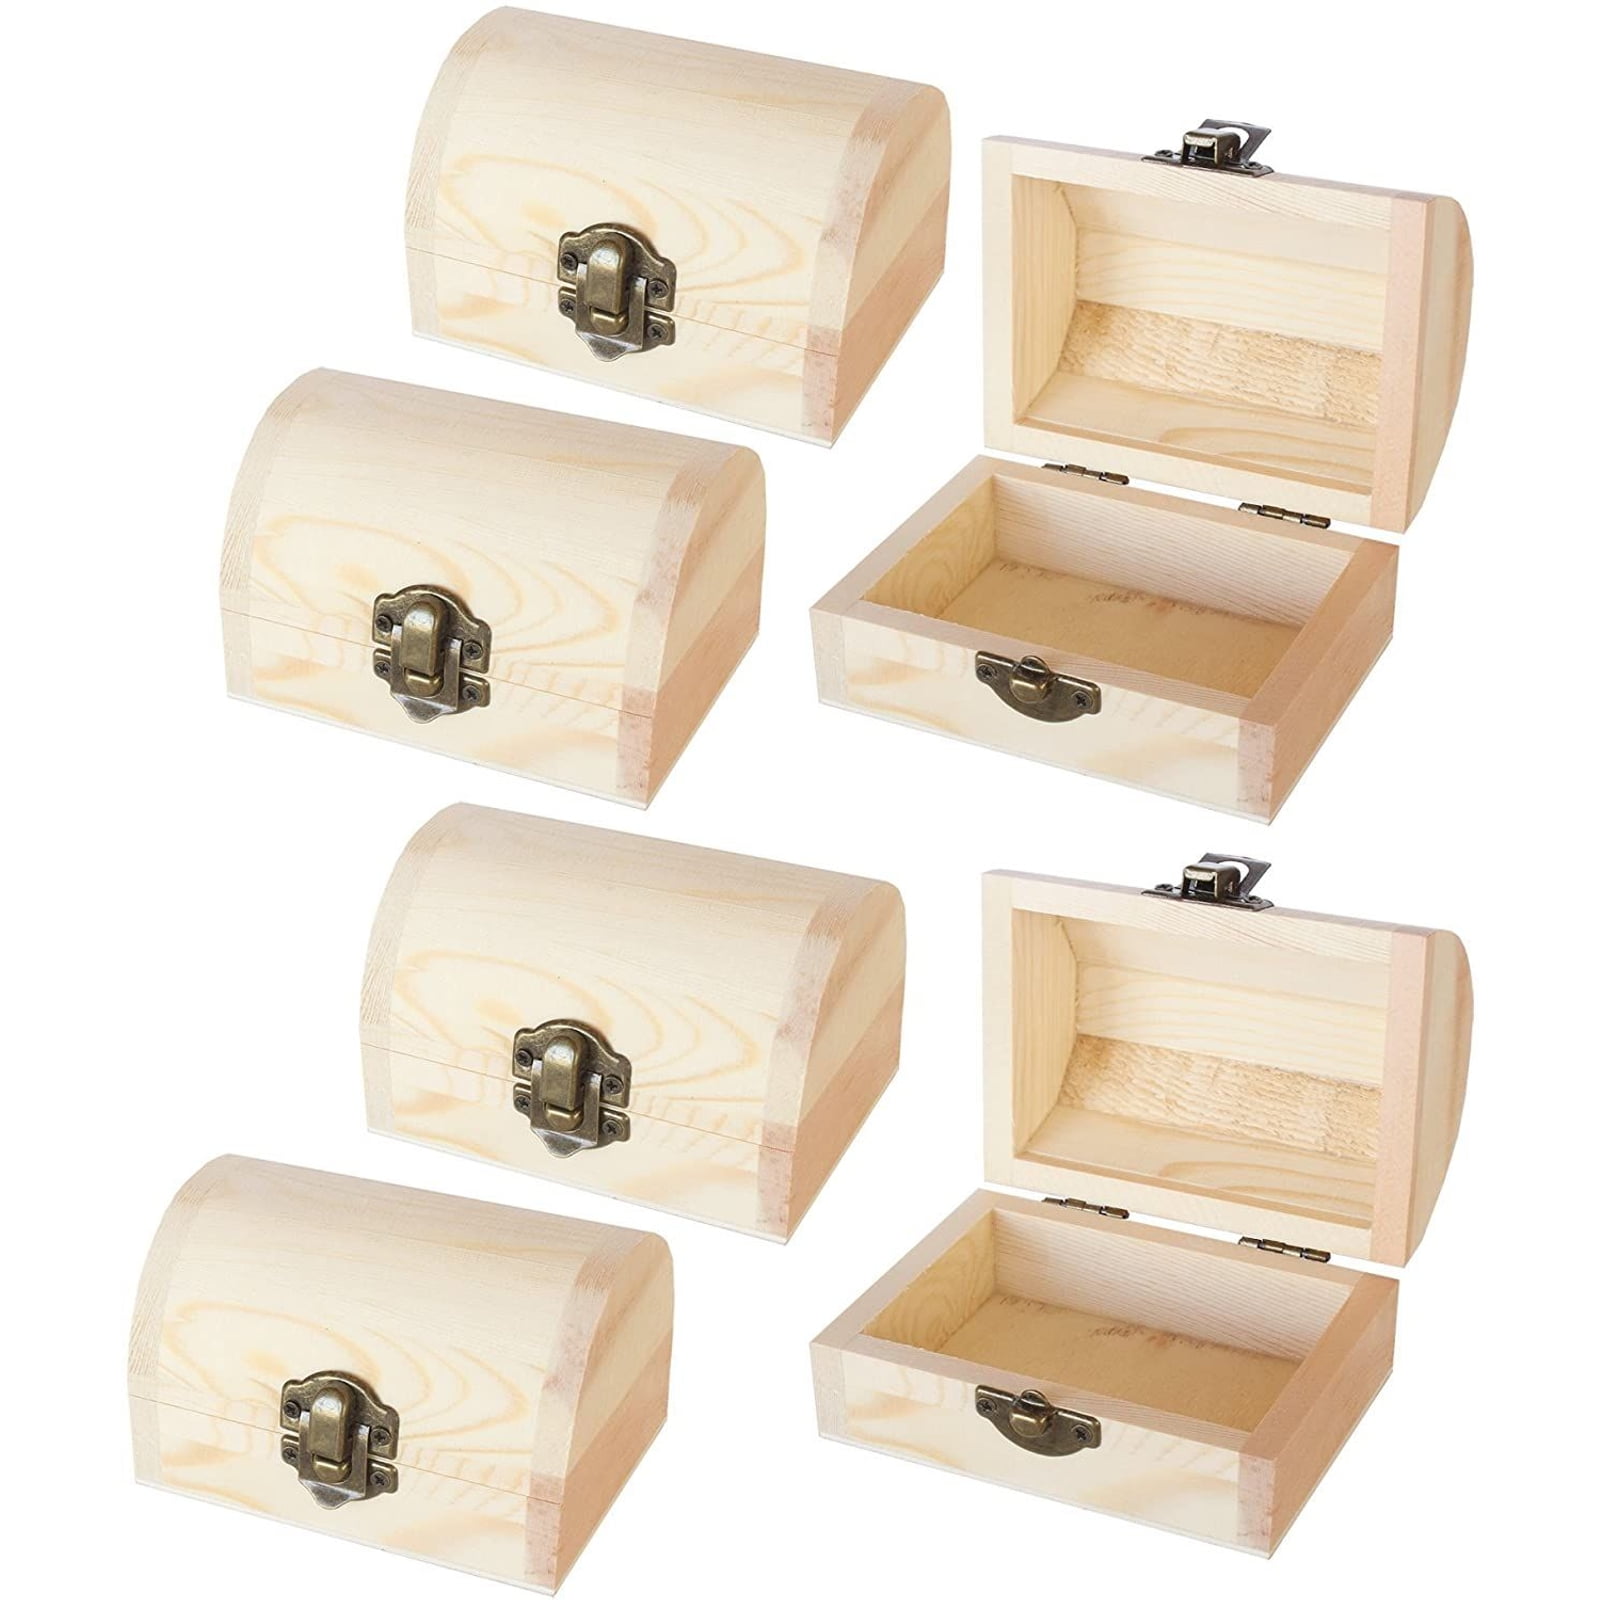 Crafts & More Package of 6 Unfinished Wood Treasure Chest Boxes for Weddings 